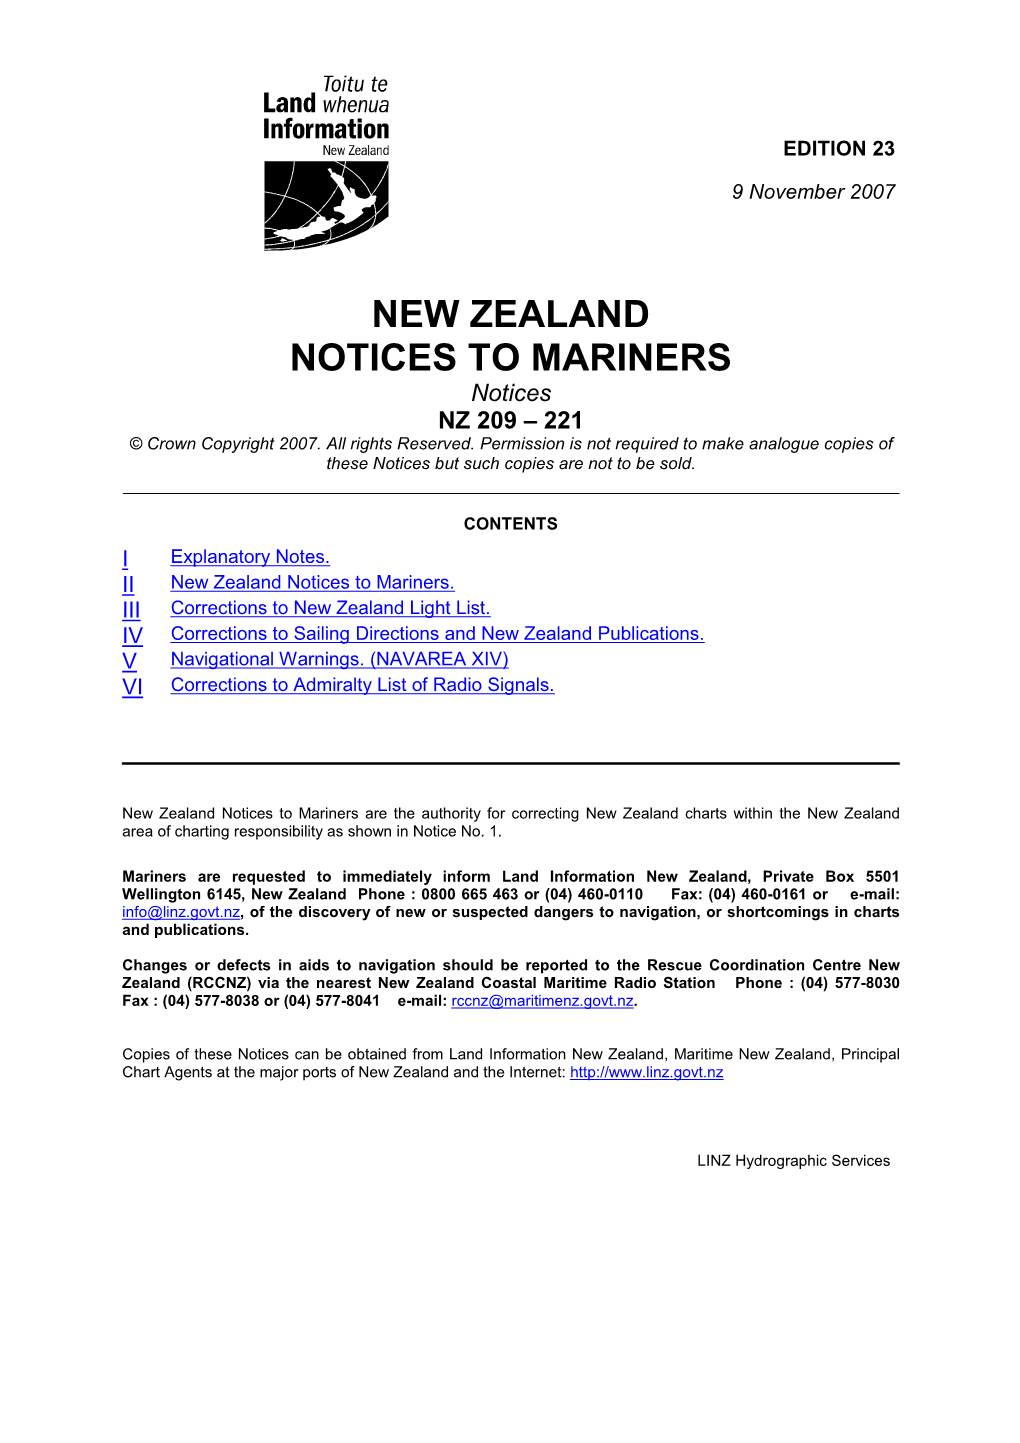 NZ NOTICES to MARINERS EDITION 23 9 November 2007